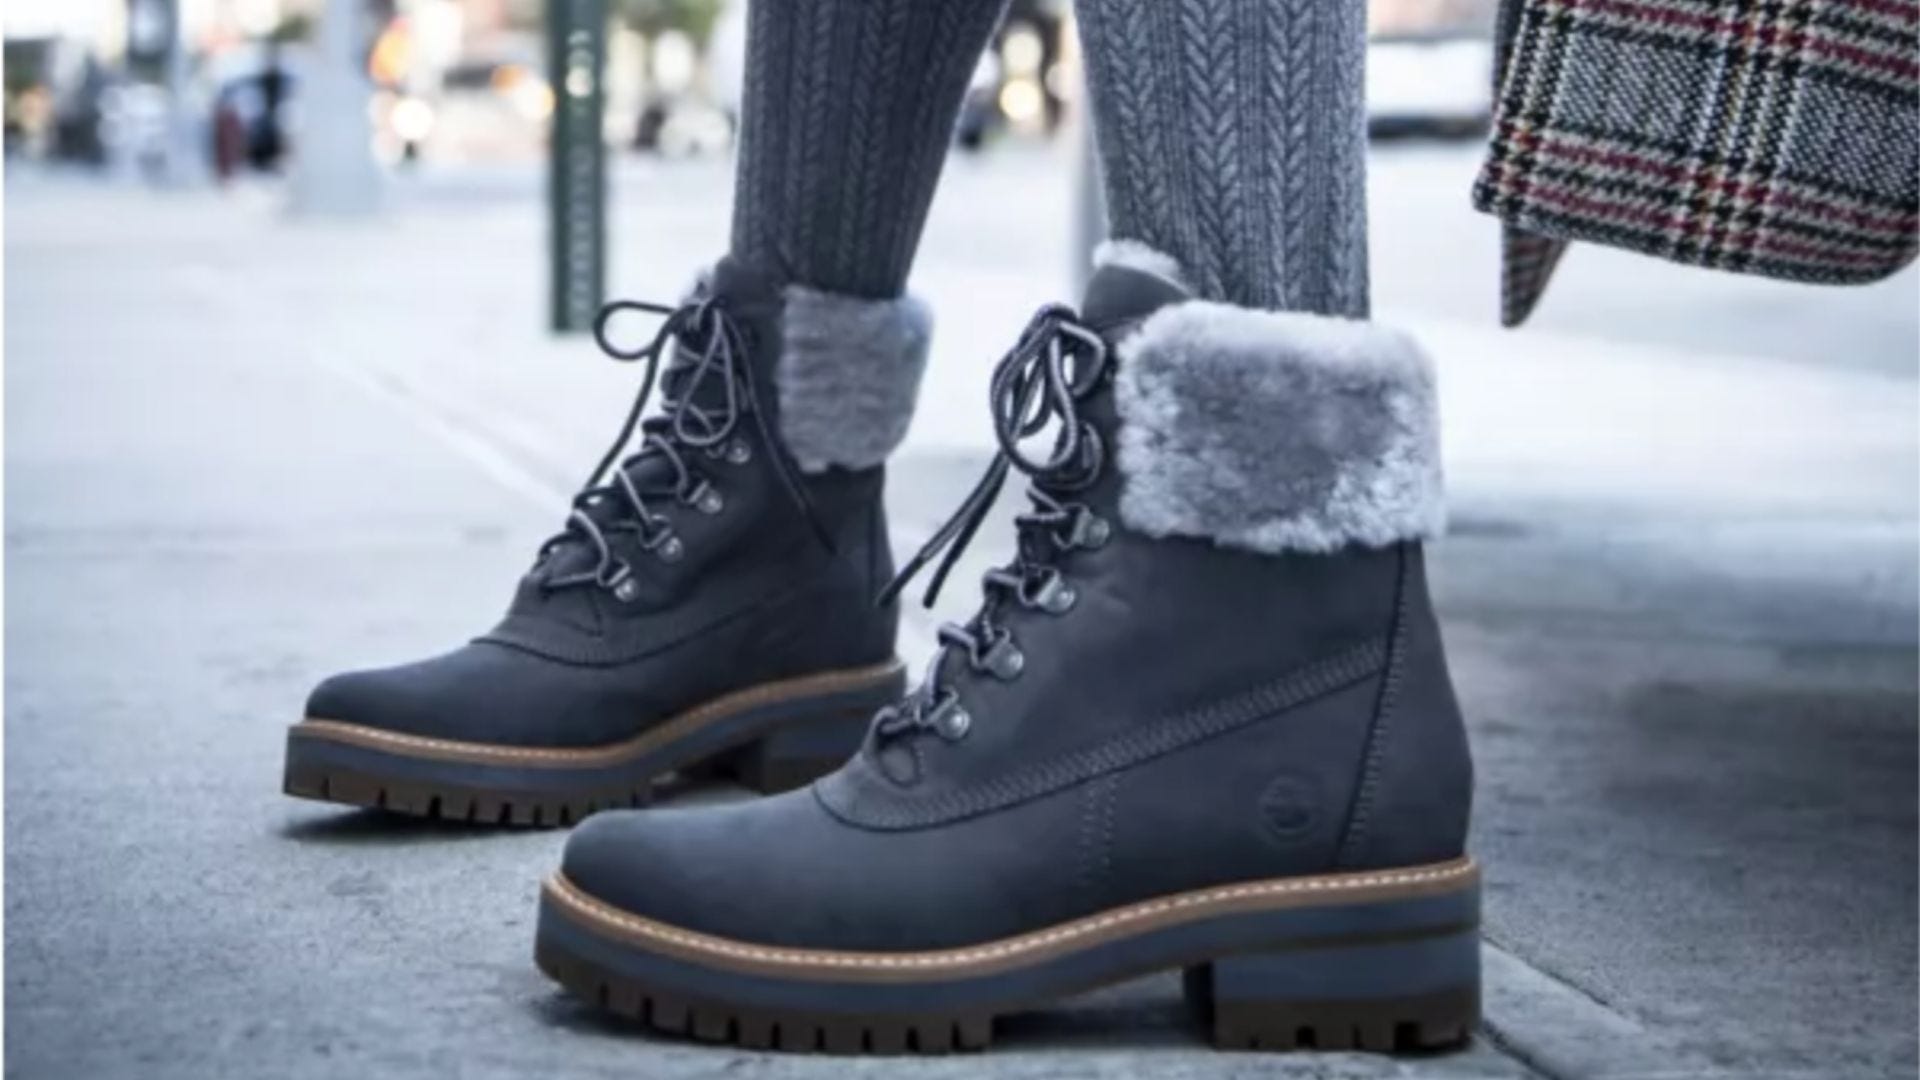 timberland shoes black friday